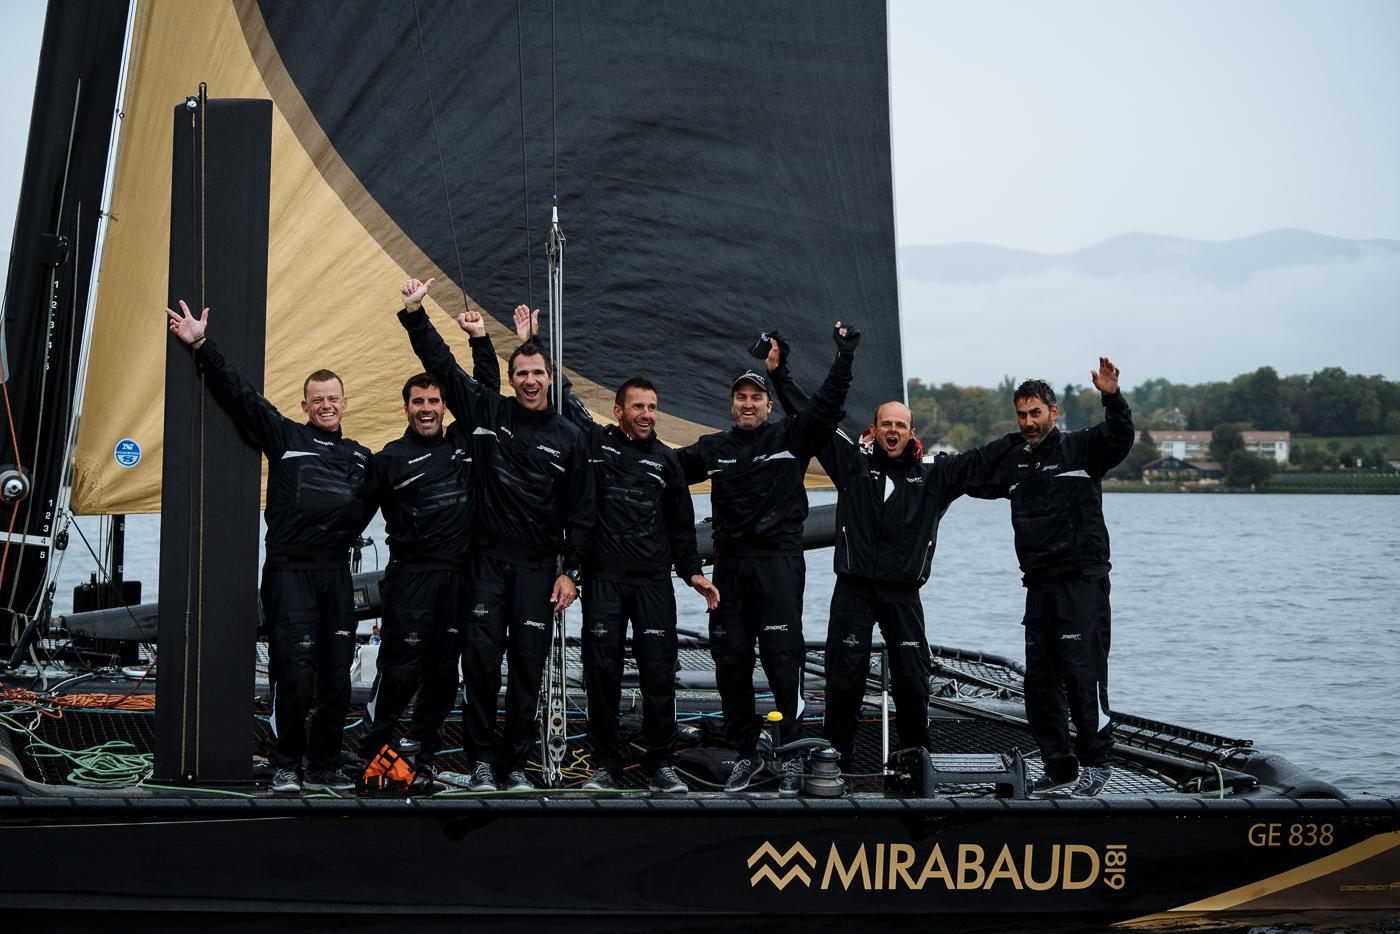 From left to right: Malo Bessec, Benjamin Amiot, Erwan Israel, Xavier Revil, Fred Moreau, Nicolas Débordès, Jacques Guichard